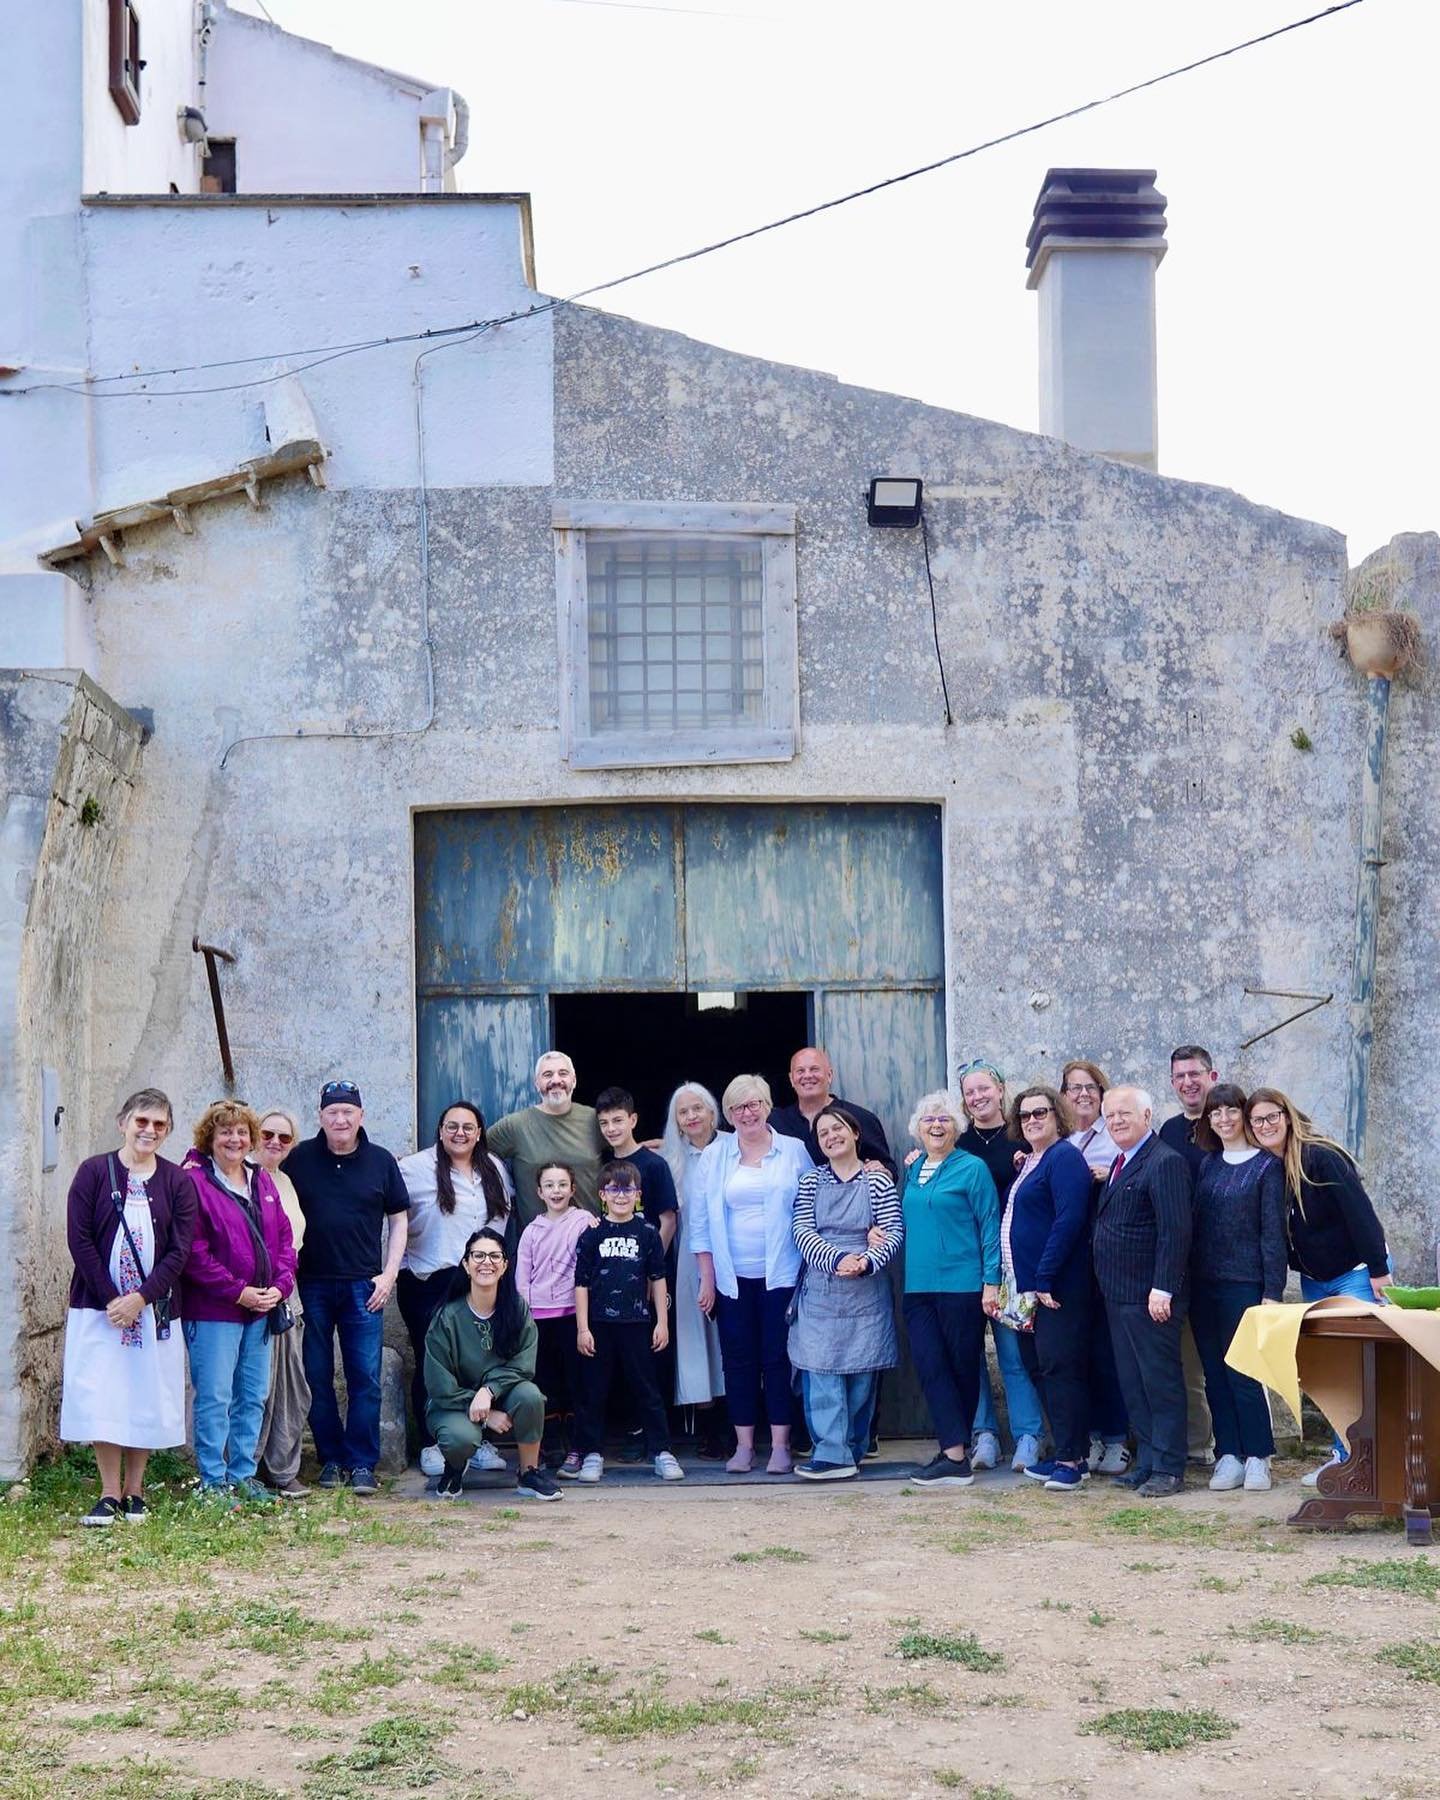 We are very lucky that the people who come to our classes and workshops always come with open hearts and minds, a good appetite for not only the regional cuisine of Puglia but for new experiences. 

We hosted our 4-day culinary workshop last week and